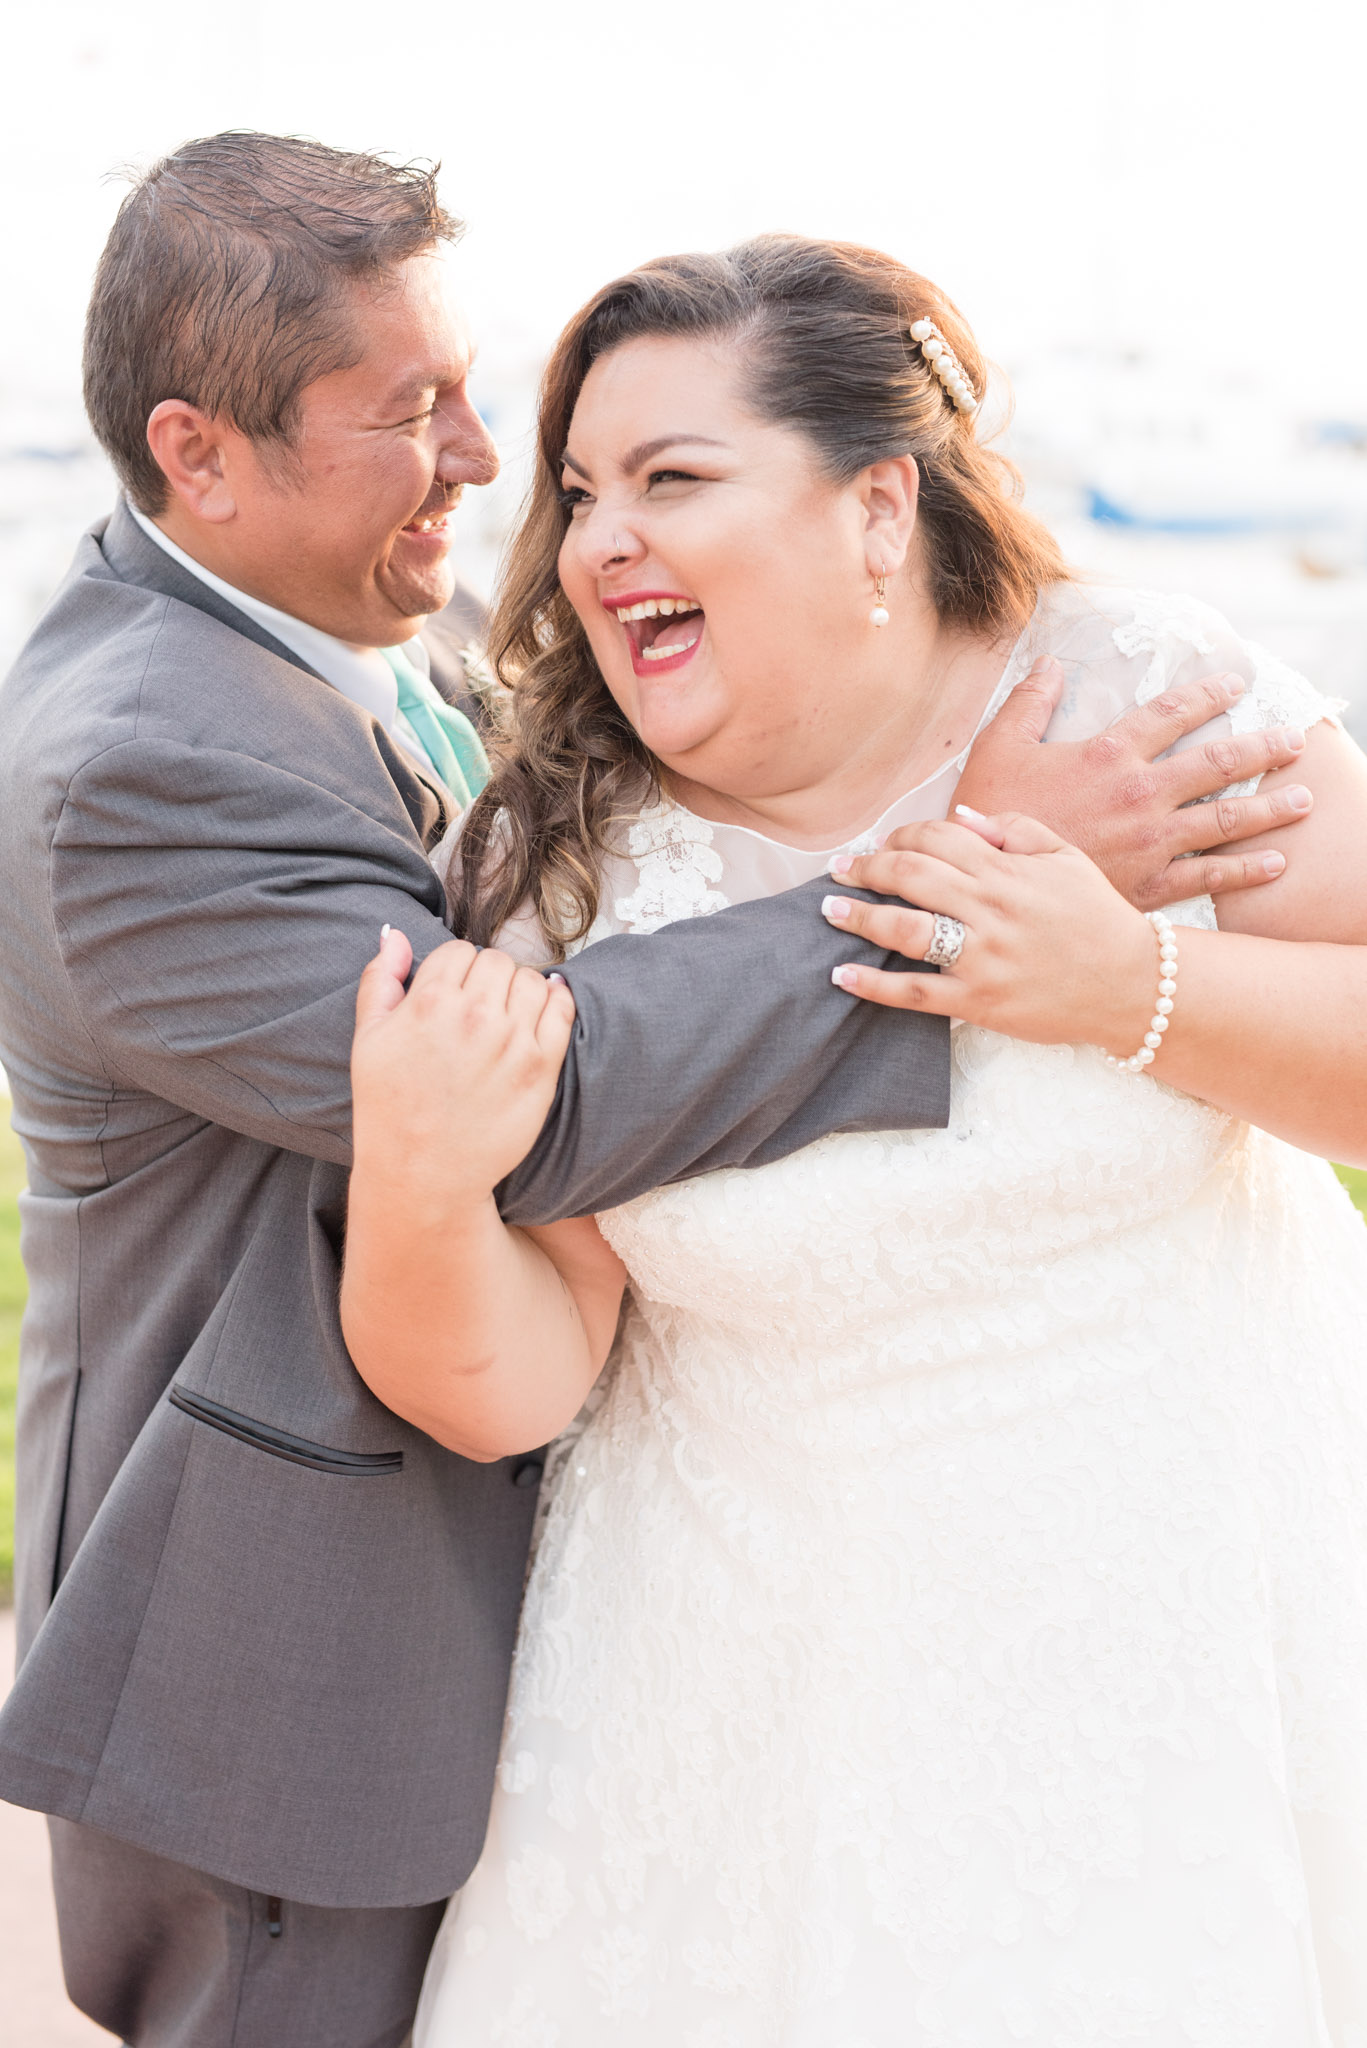 Groom hugs bride while they laugh.